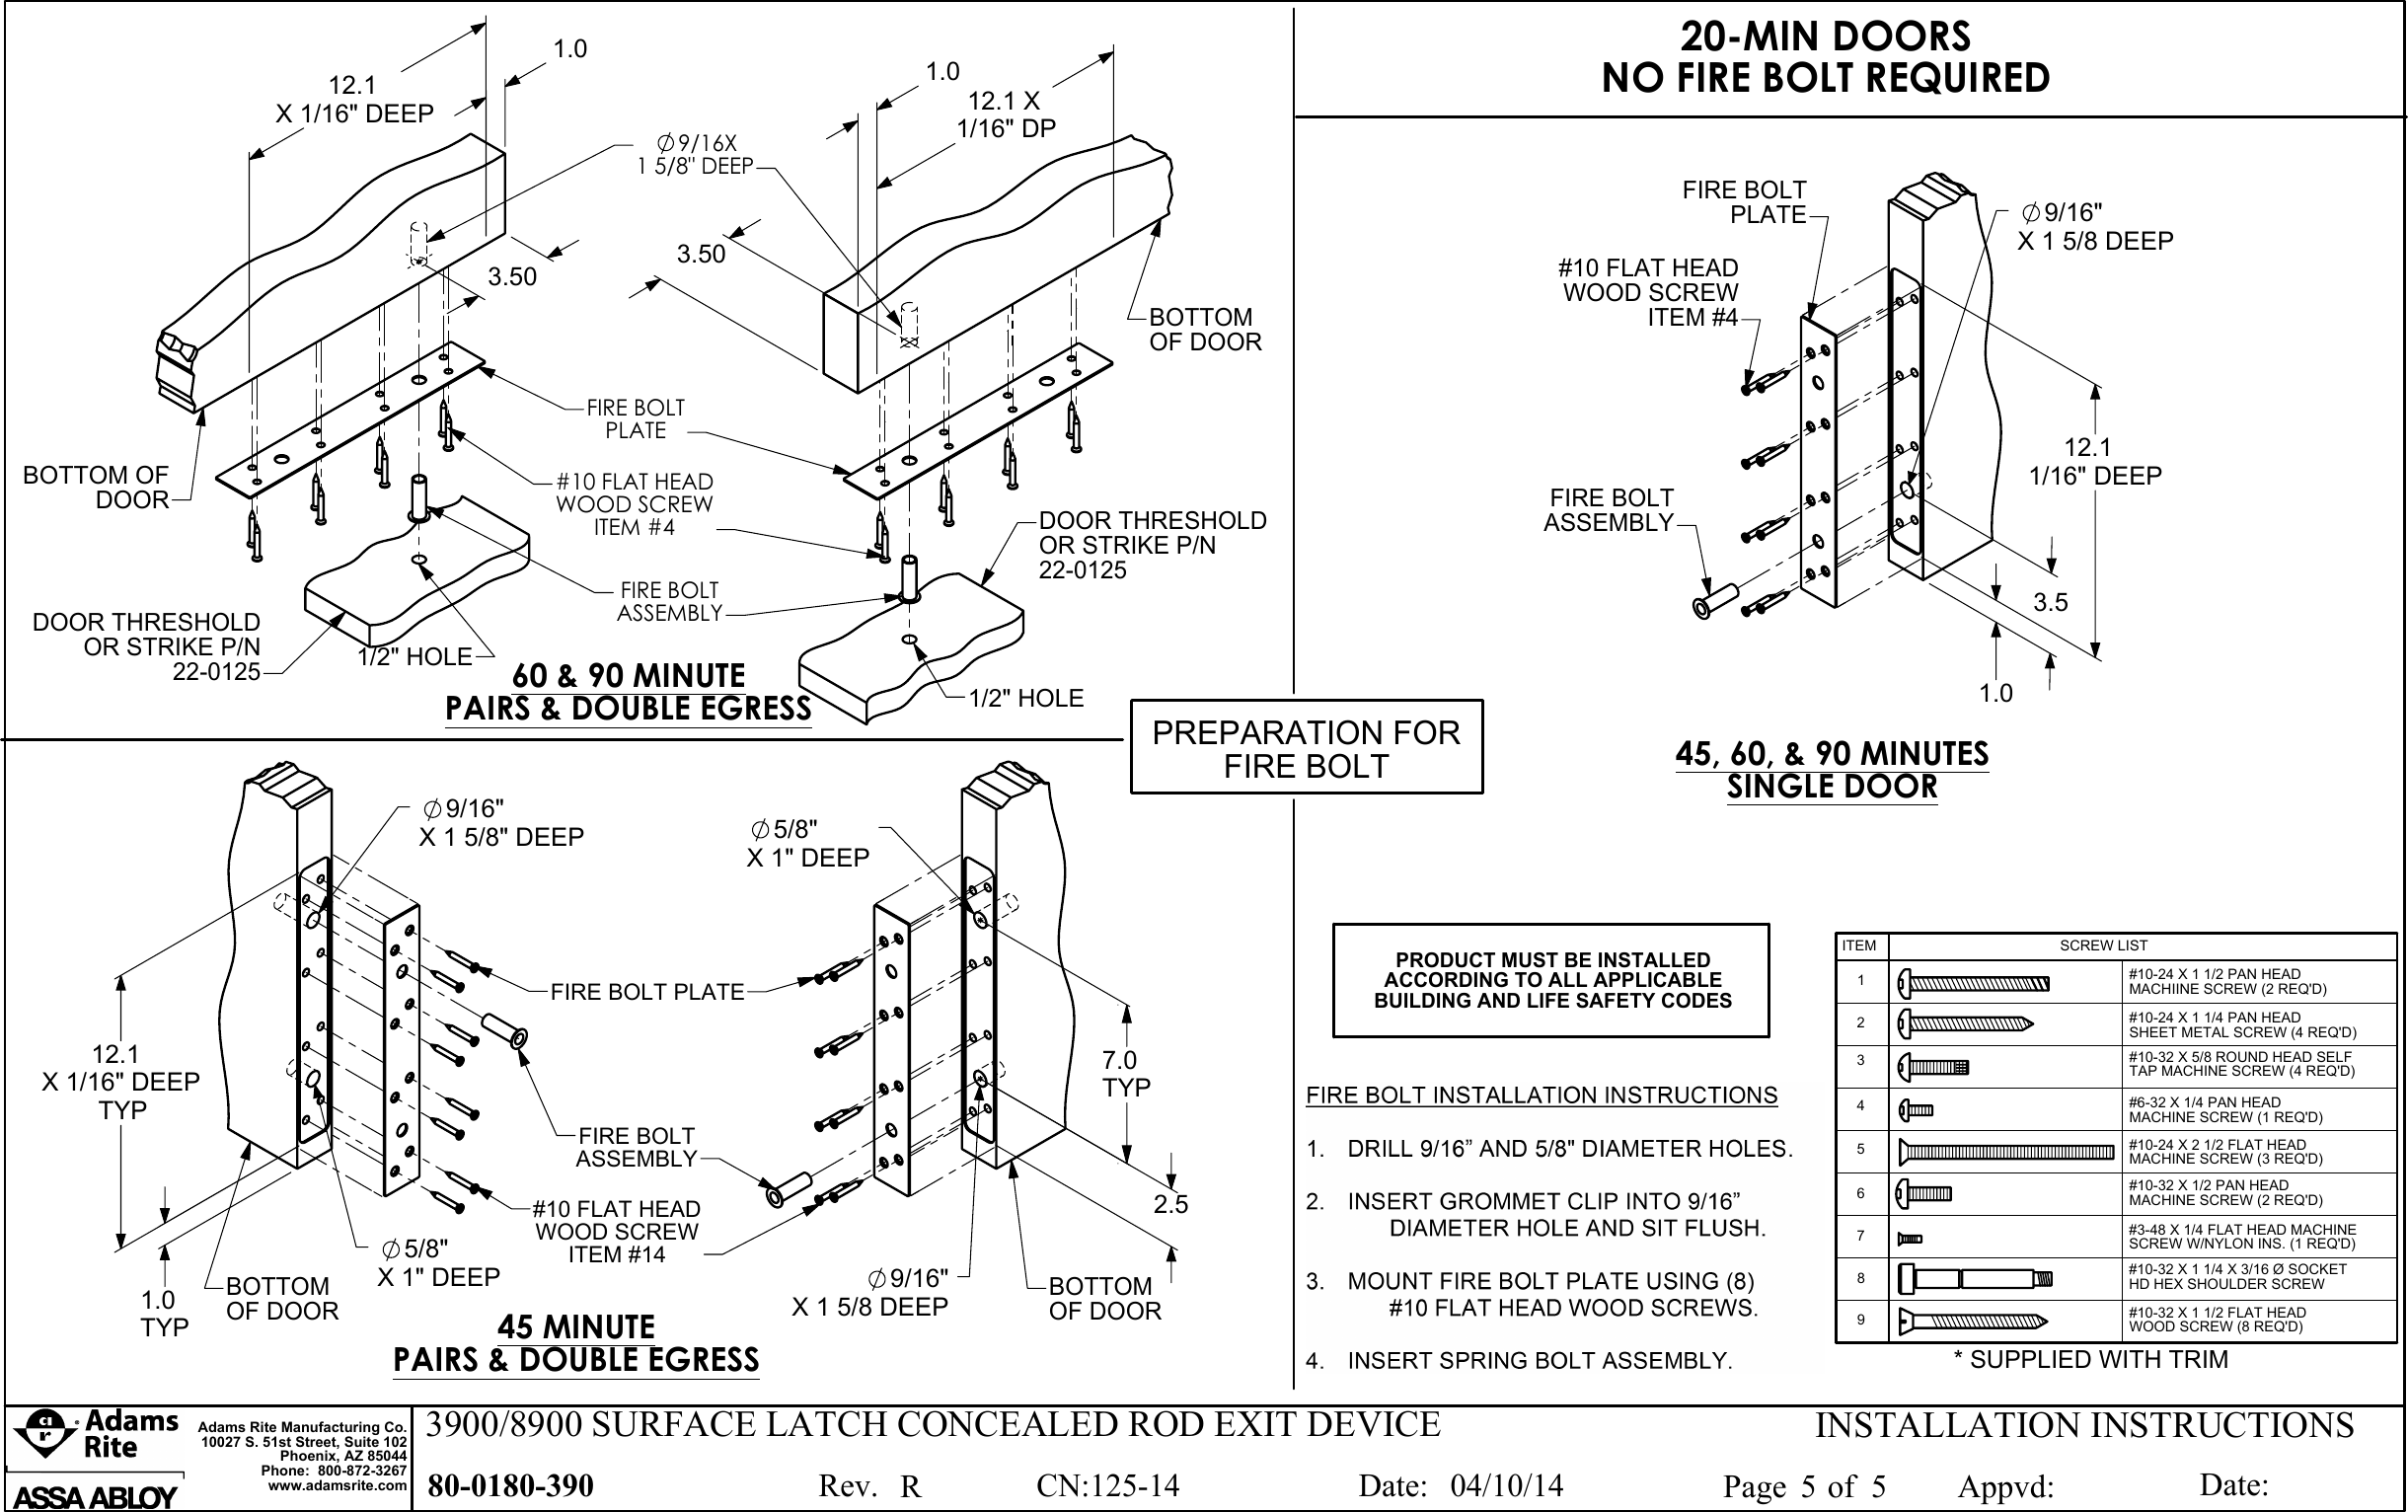 Page 5 of 5 - Adams Rite 80-0180-390_R 3900/8900 Surface Latch Concealed Rod Exit Device Installation Instructions 3900 8900 80-0180-390 R